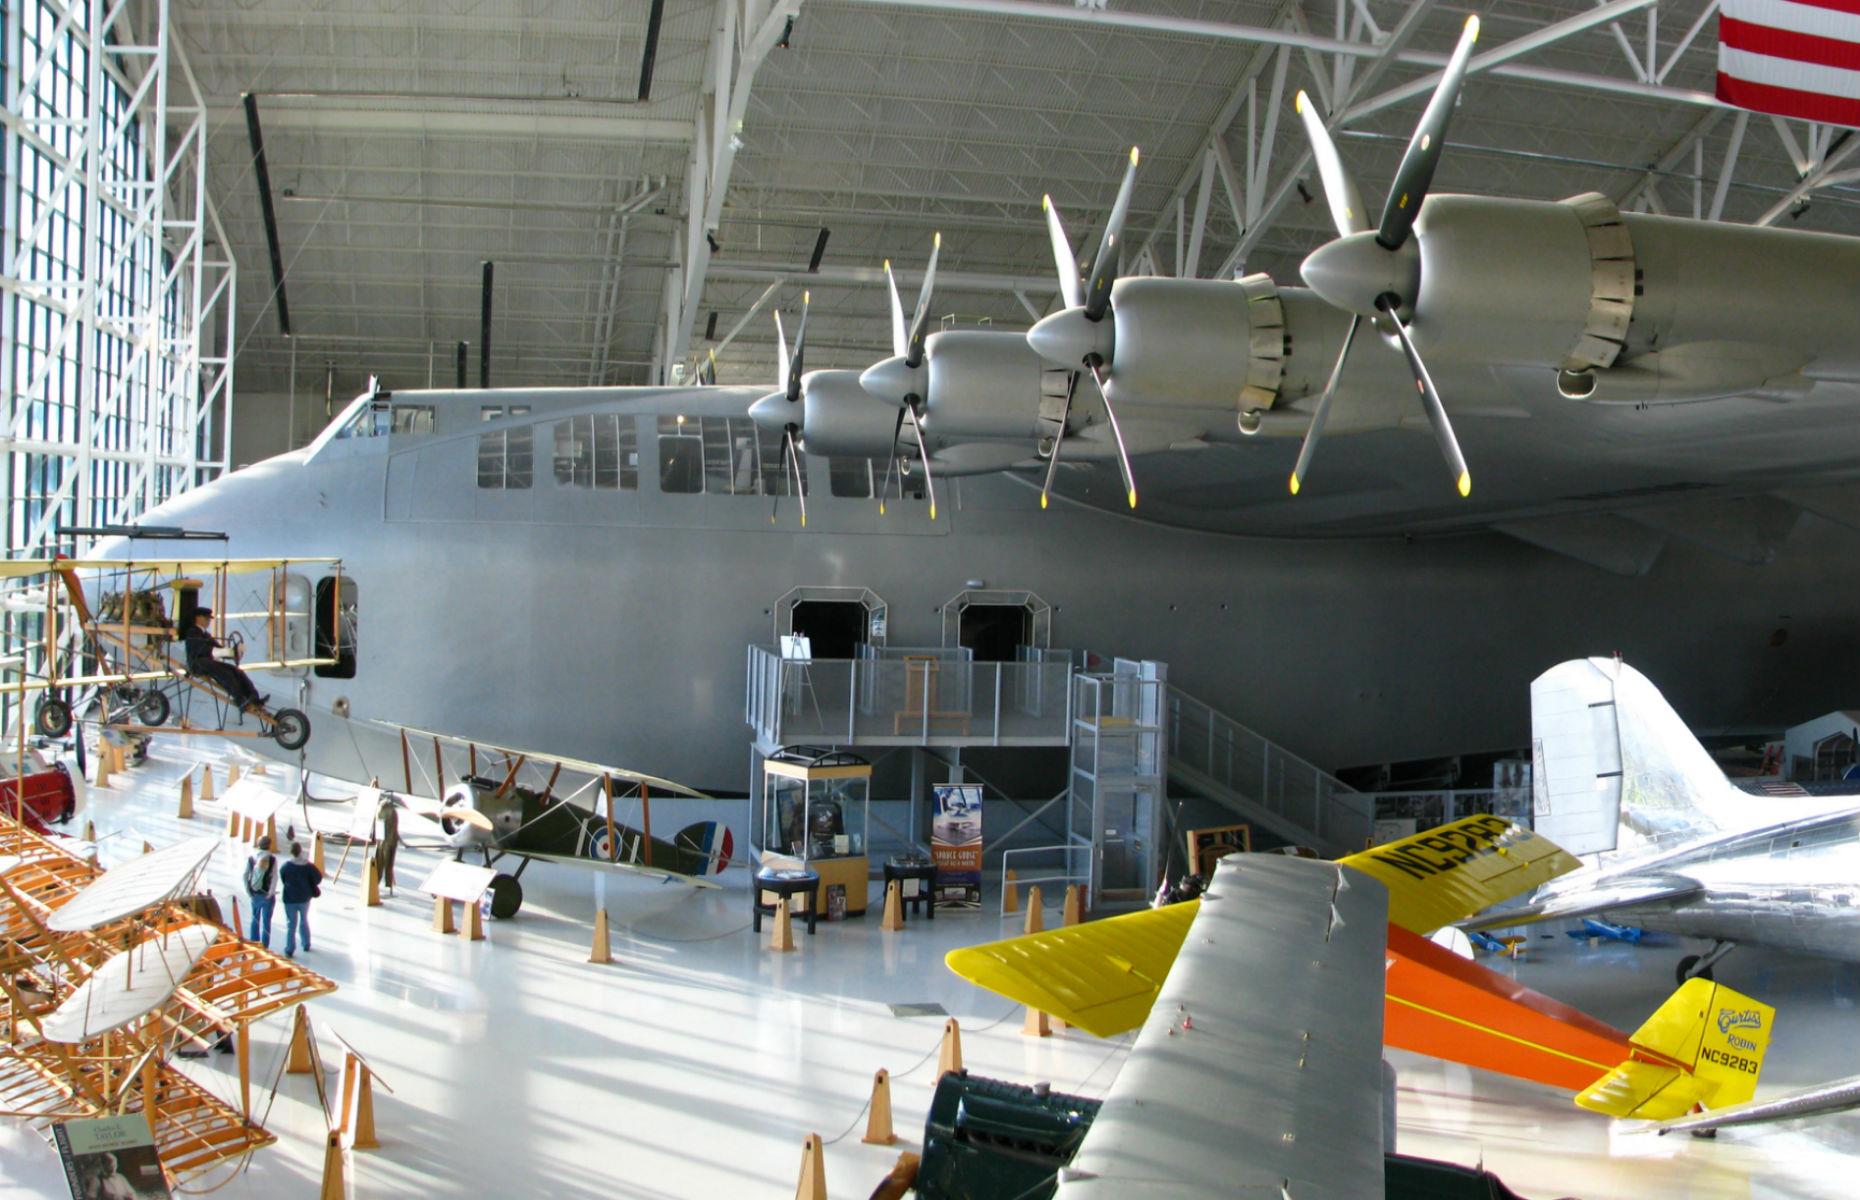 <p>The press dubbed the plane the Spruce Goose because of its material, a name that Hughes reportedly despised. Not only did he feel that it insulted his engineers, but it was also inaccurate – the plane was made from birch. Despite its incredible size and almost-as-incredible cost, the gigantic plane was sadly not destined for a life in the skies. By the time it was completed, the war was over.</p>